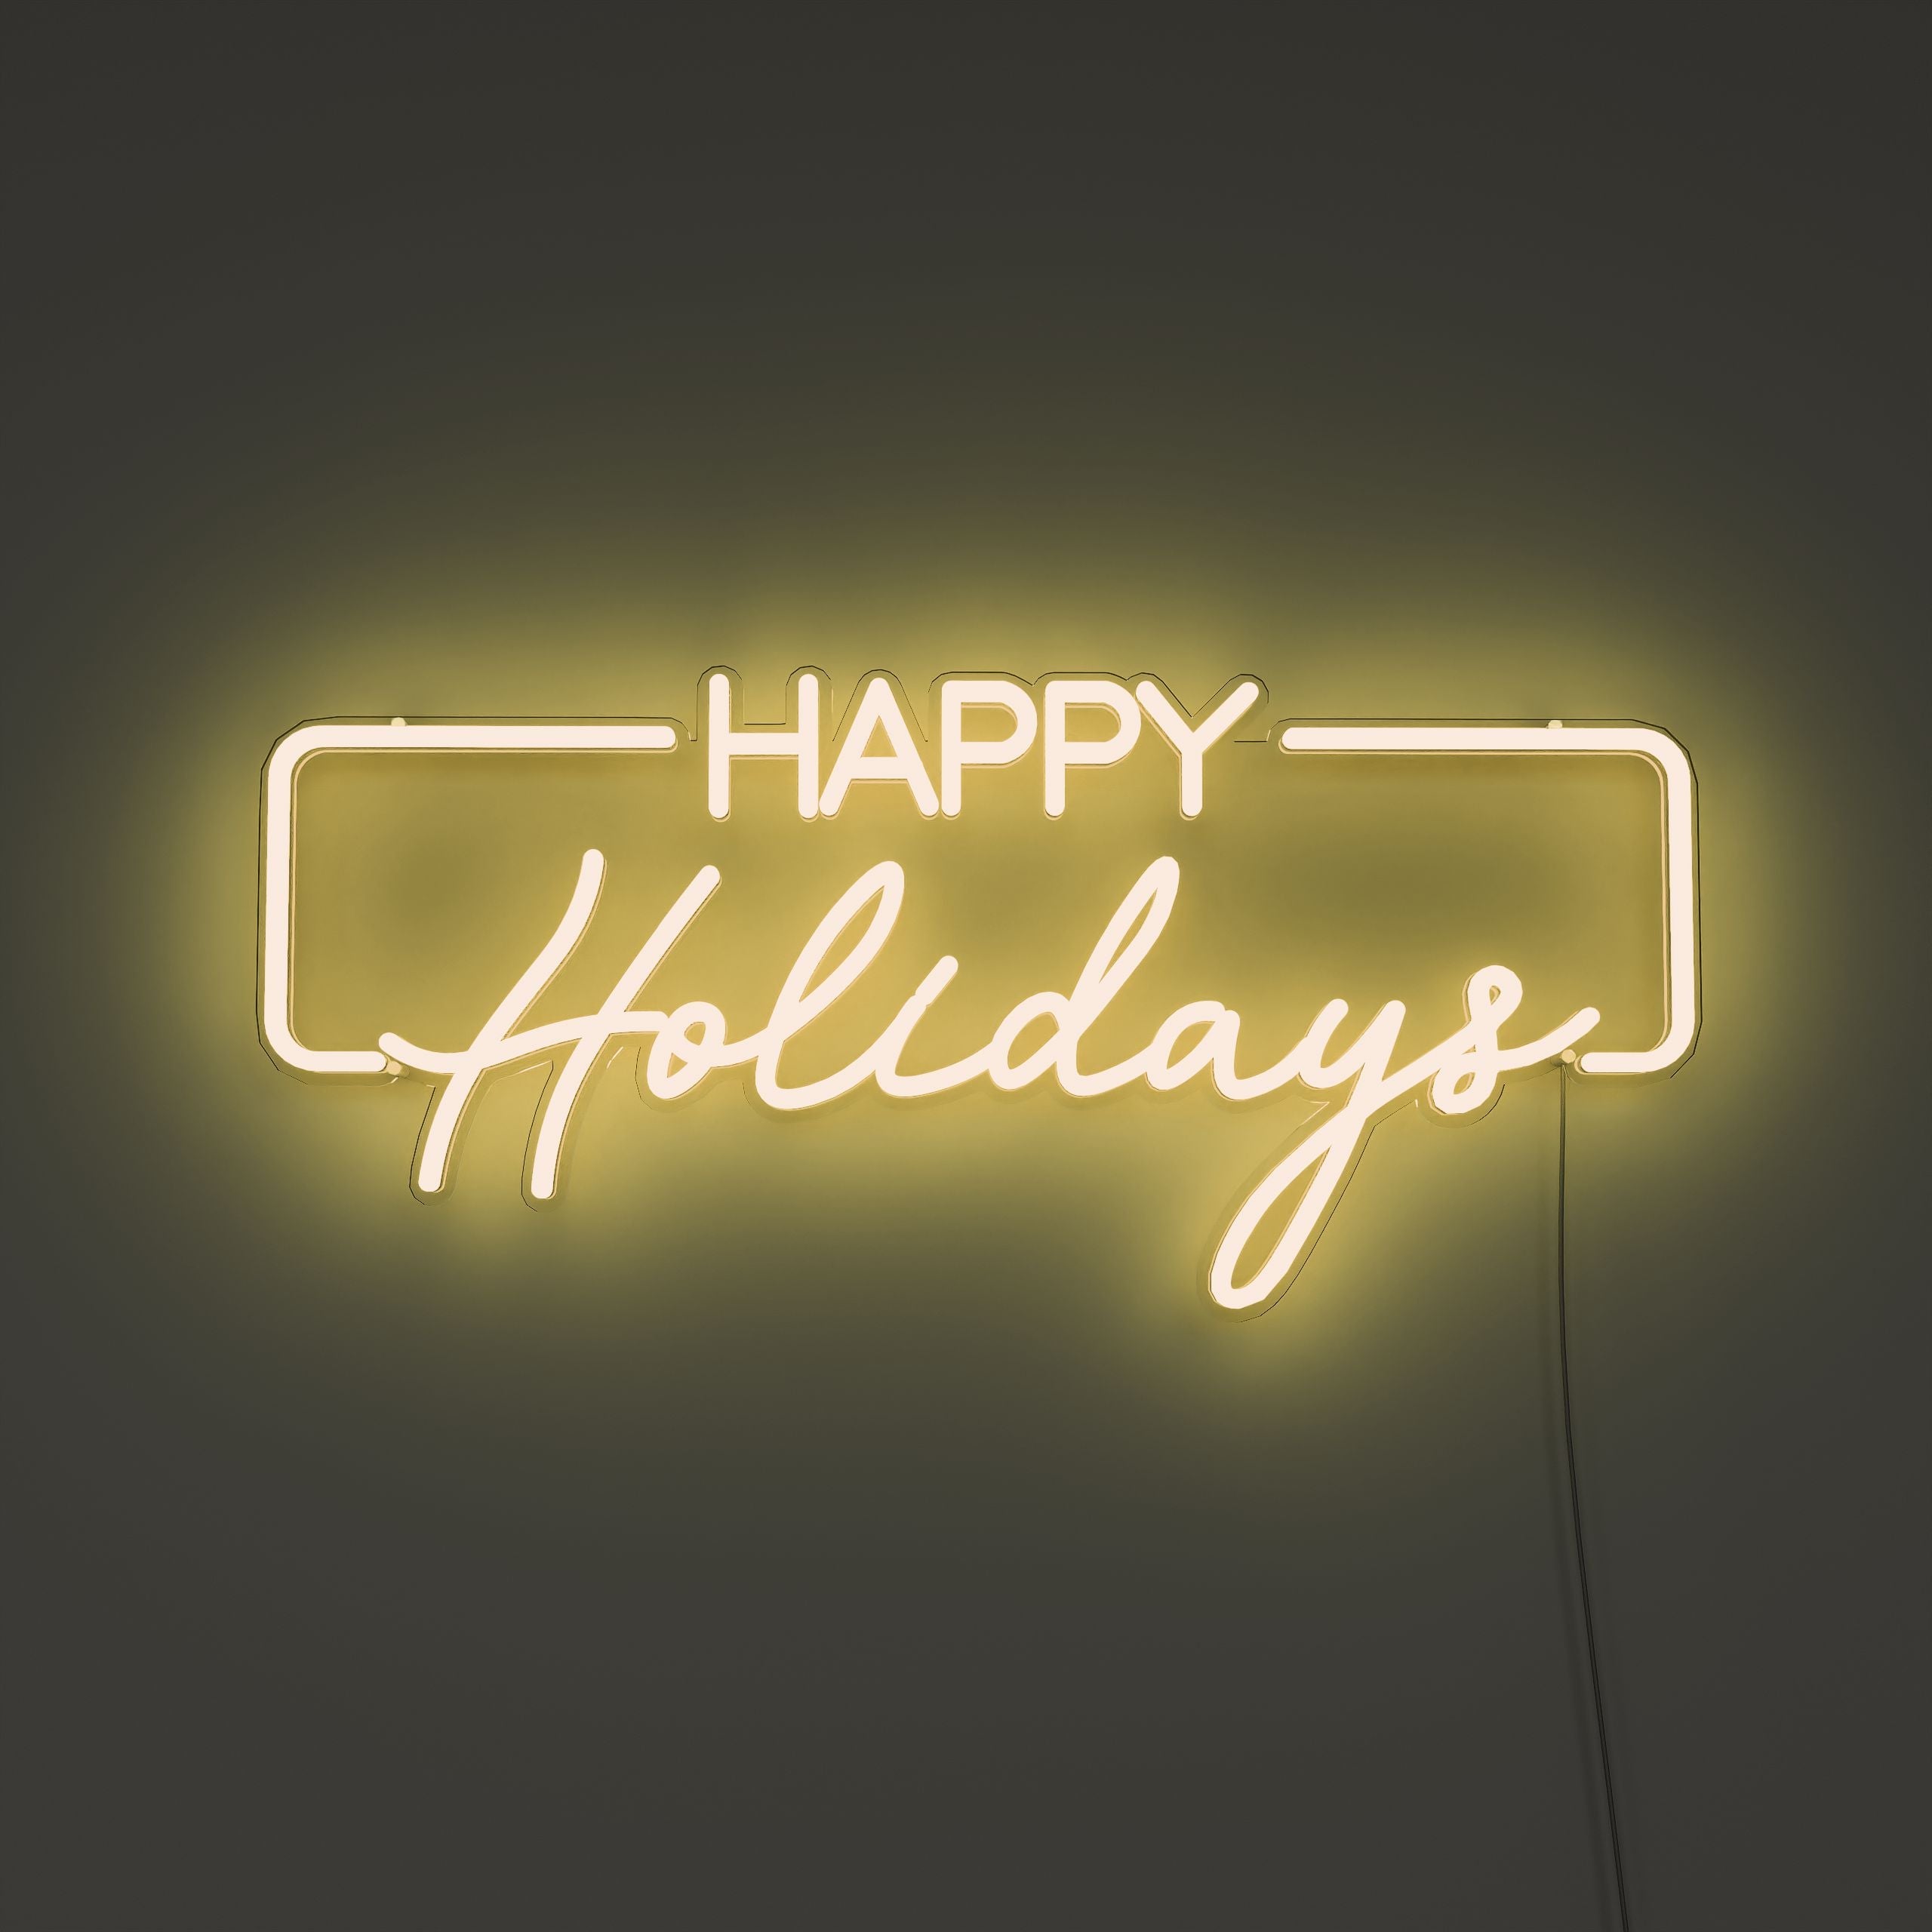 happy-holiday-vibes-neon-sign-lite